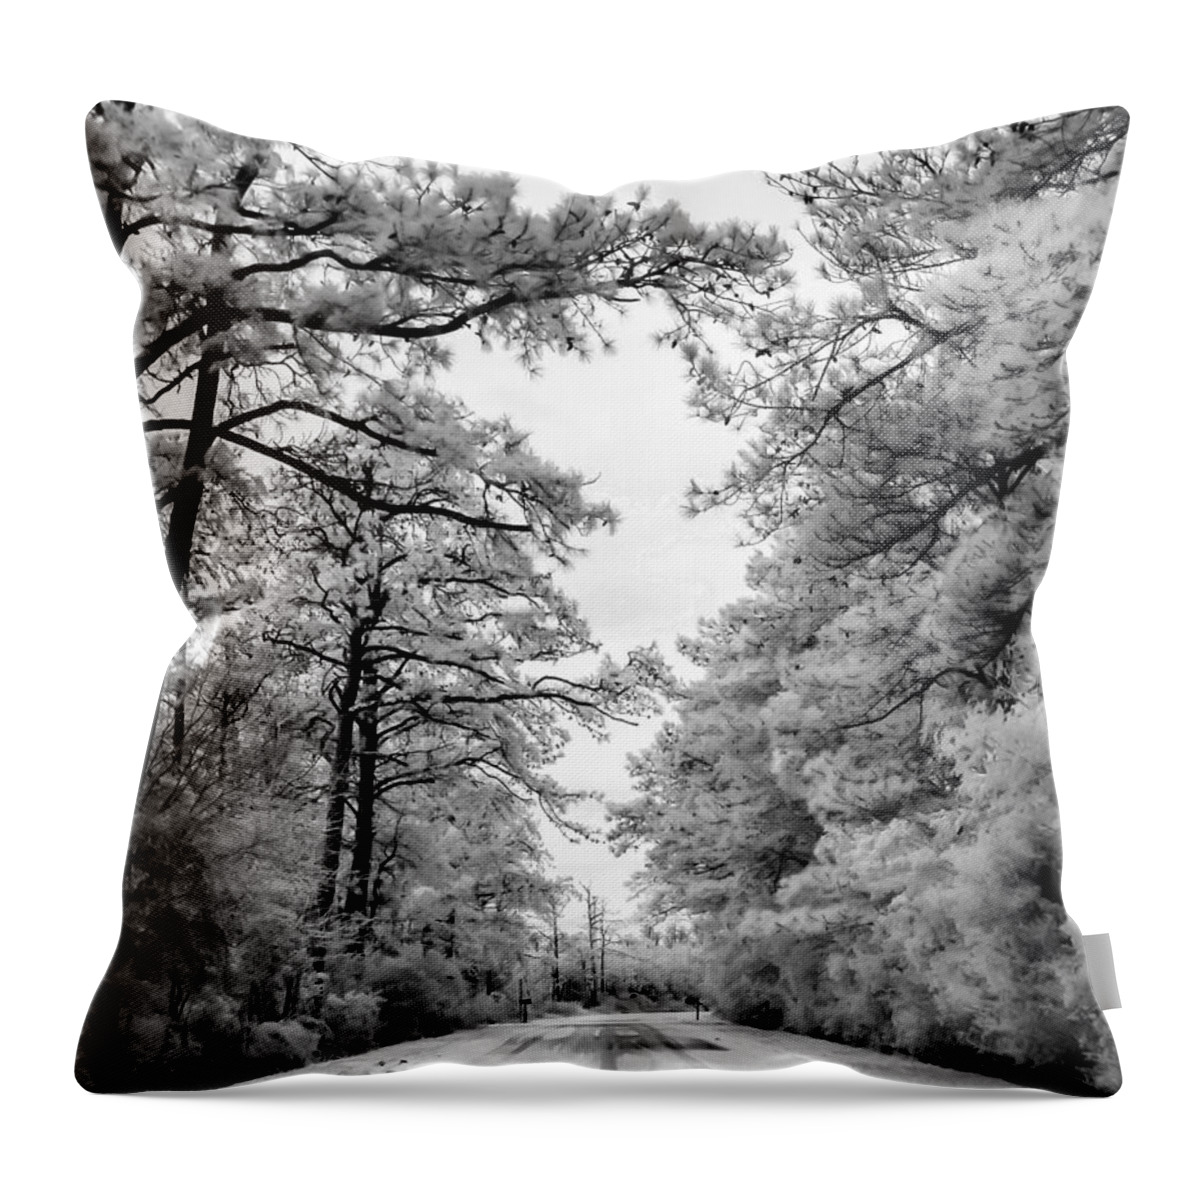 Road Throw Pillow featuring the photograph Slippery When Frozen by Hayden Hammond